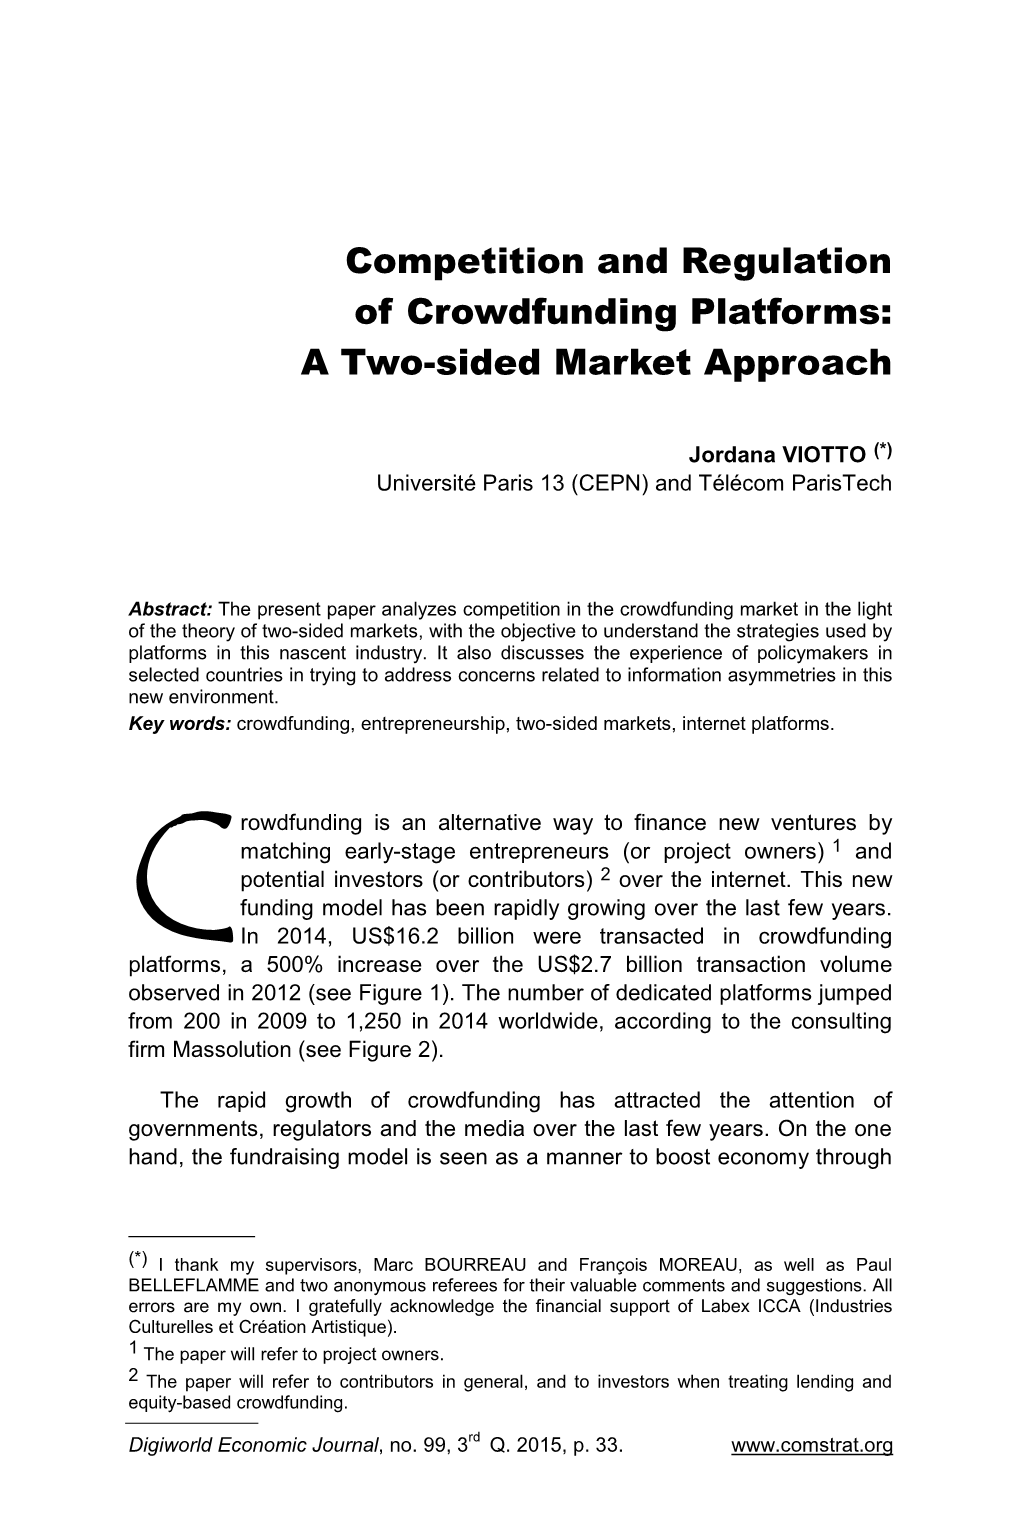 Competition and Regulation of Crowdfunding Platforms: a Two-Sided Market Approach